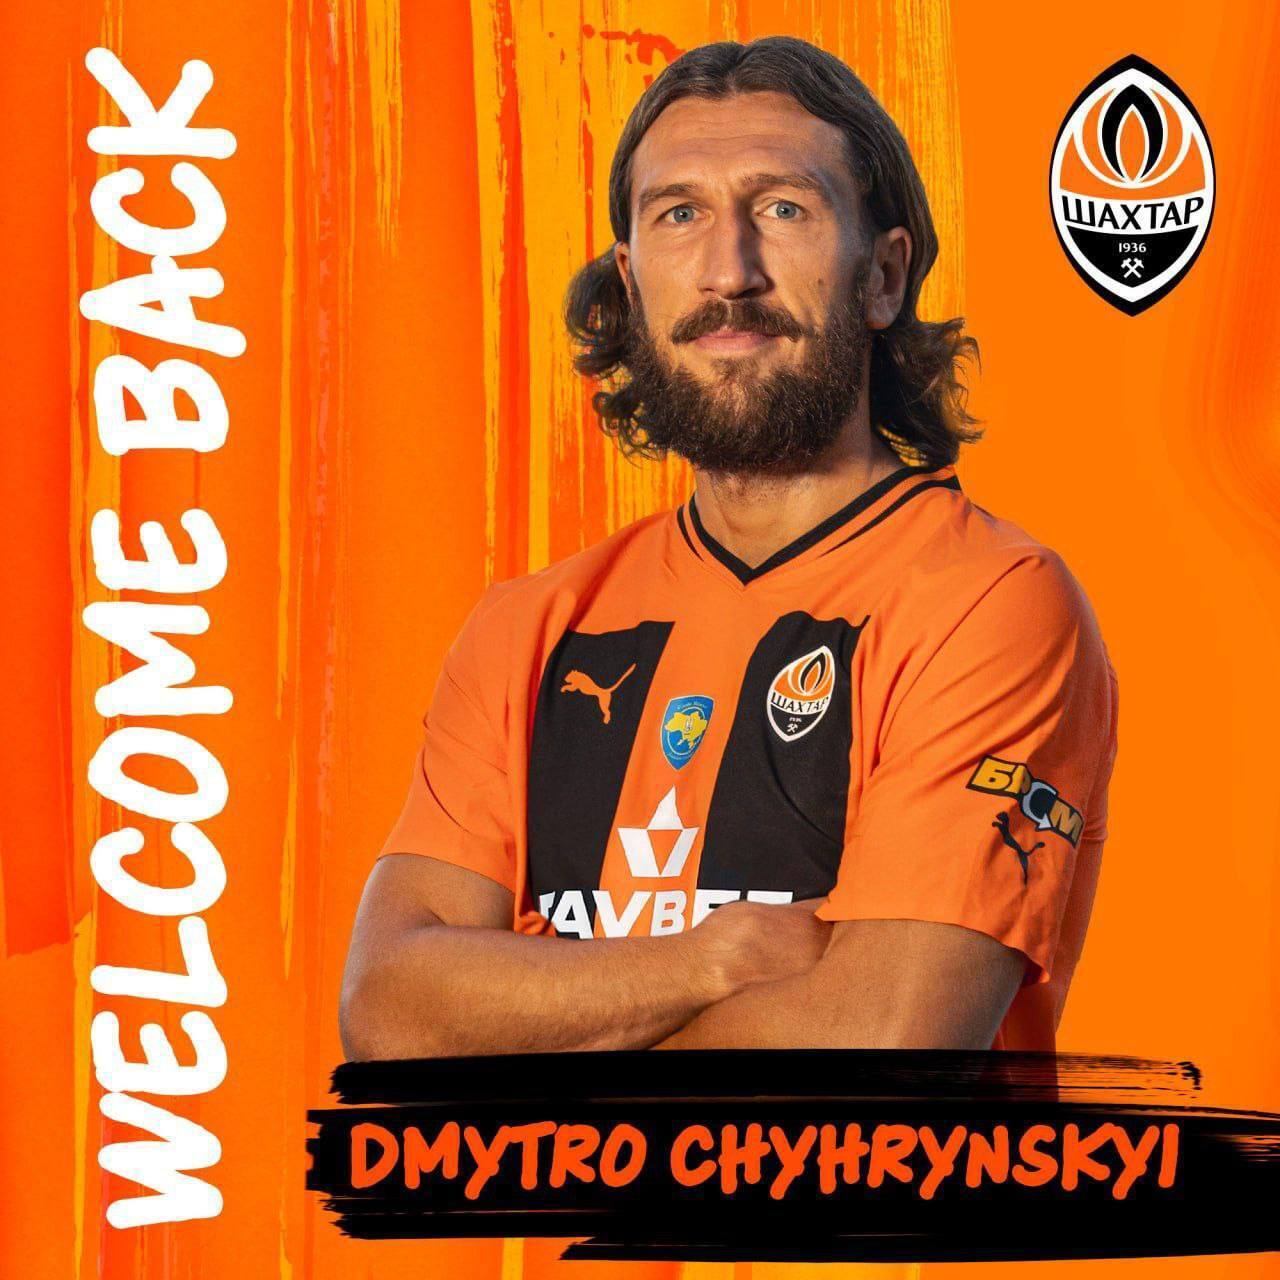 The only Ukrainian in Barcelona's history joins Shakhtar